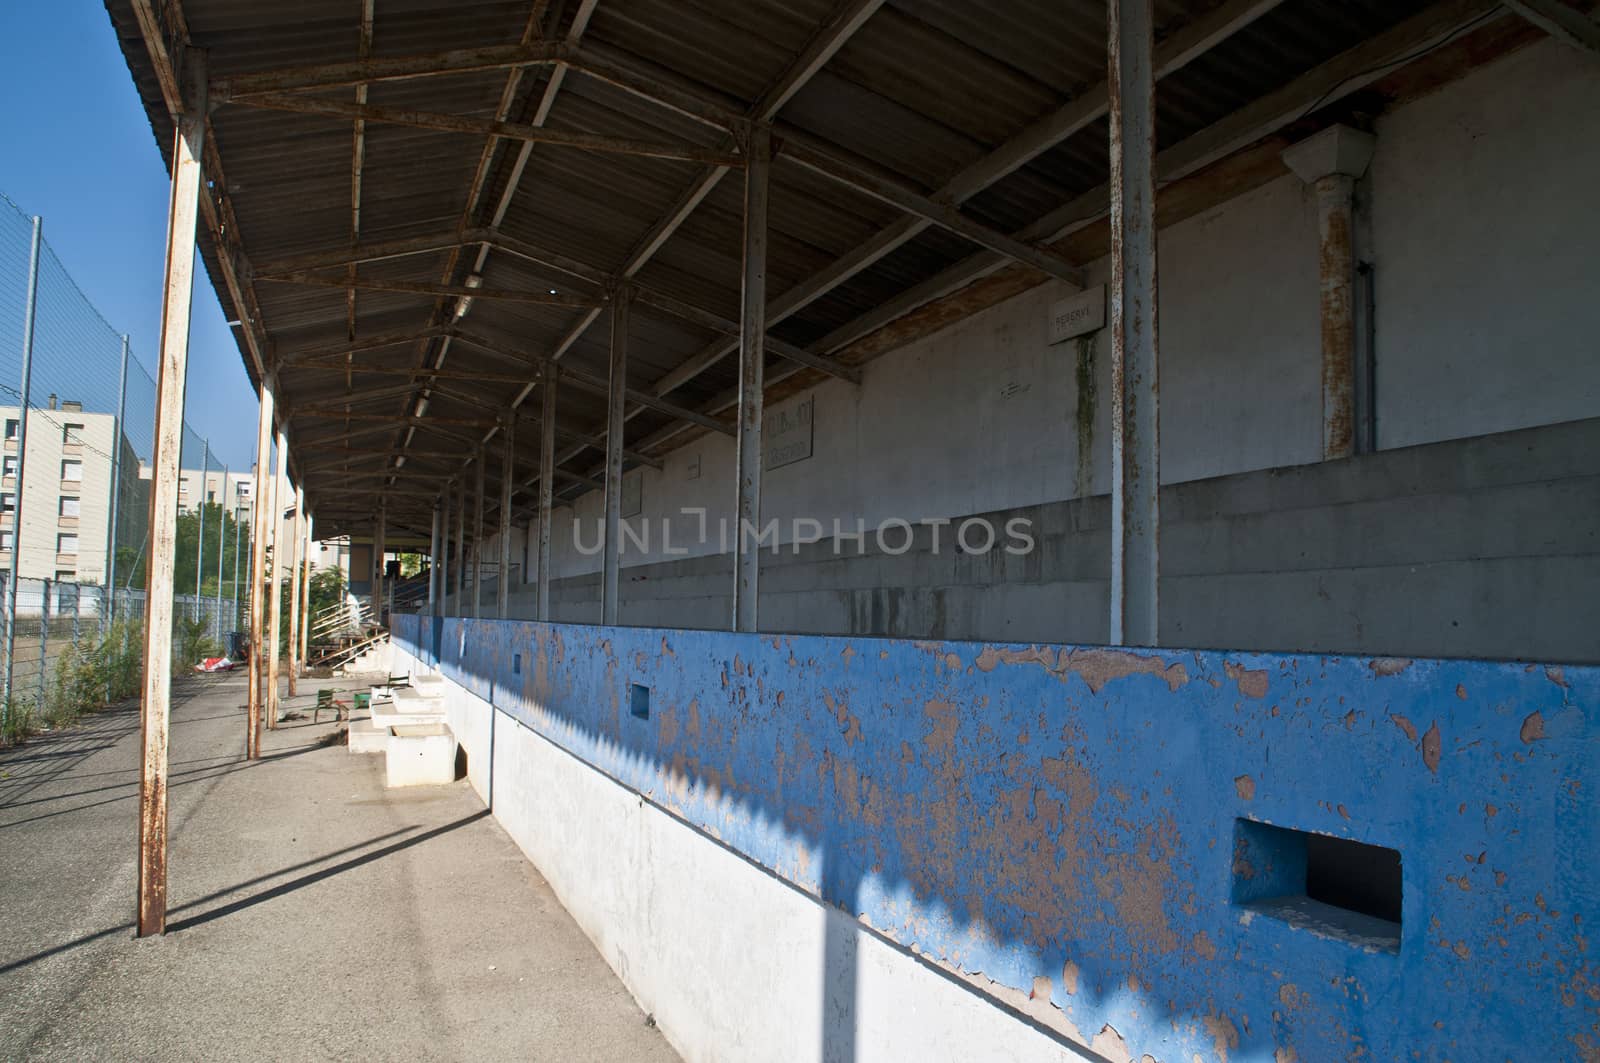 The main stand of the demolished Stade de la Palla football stadium in Valence, France.